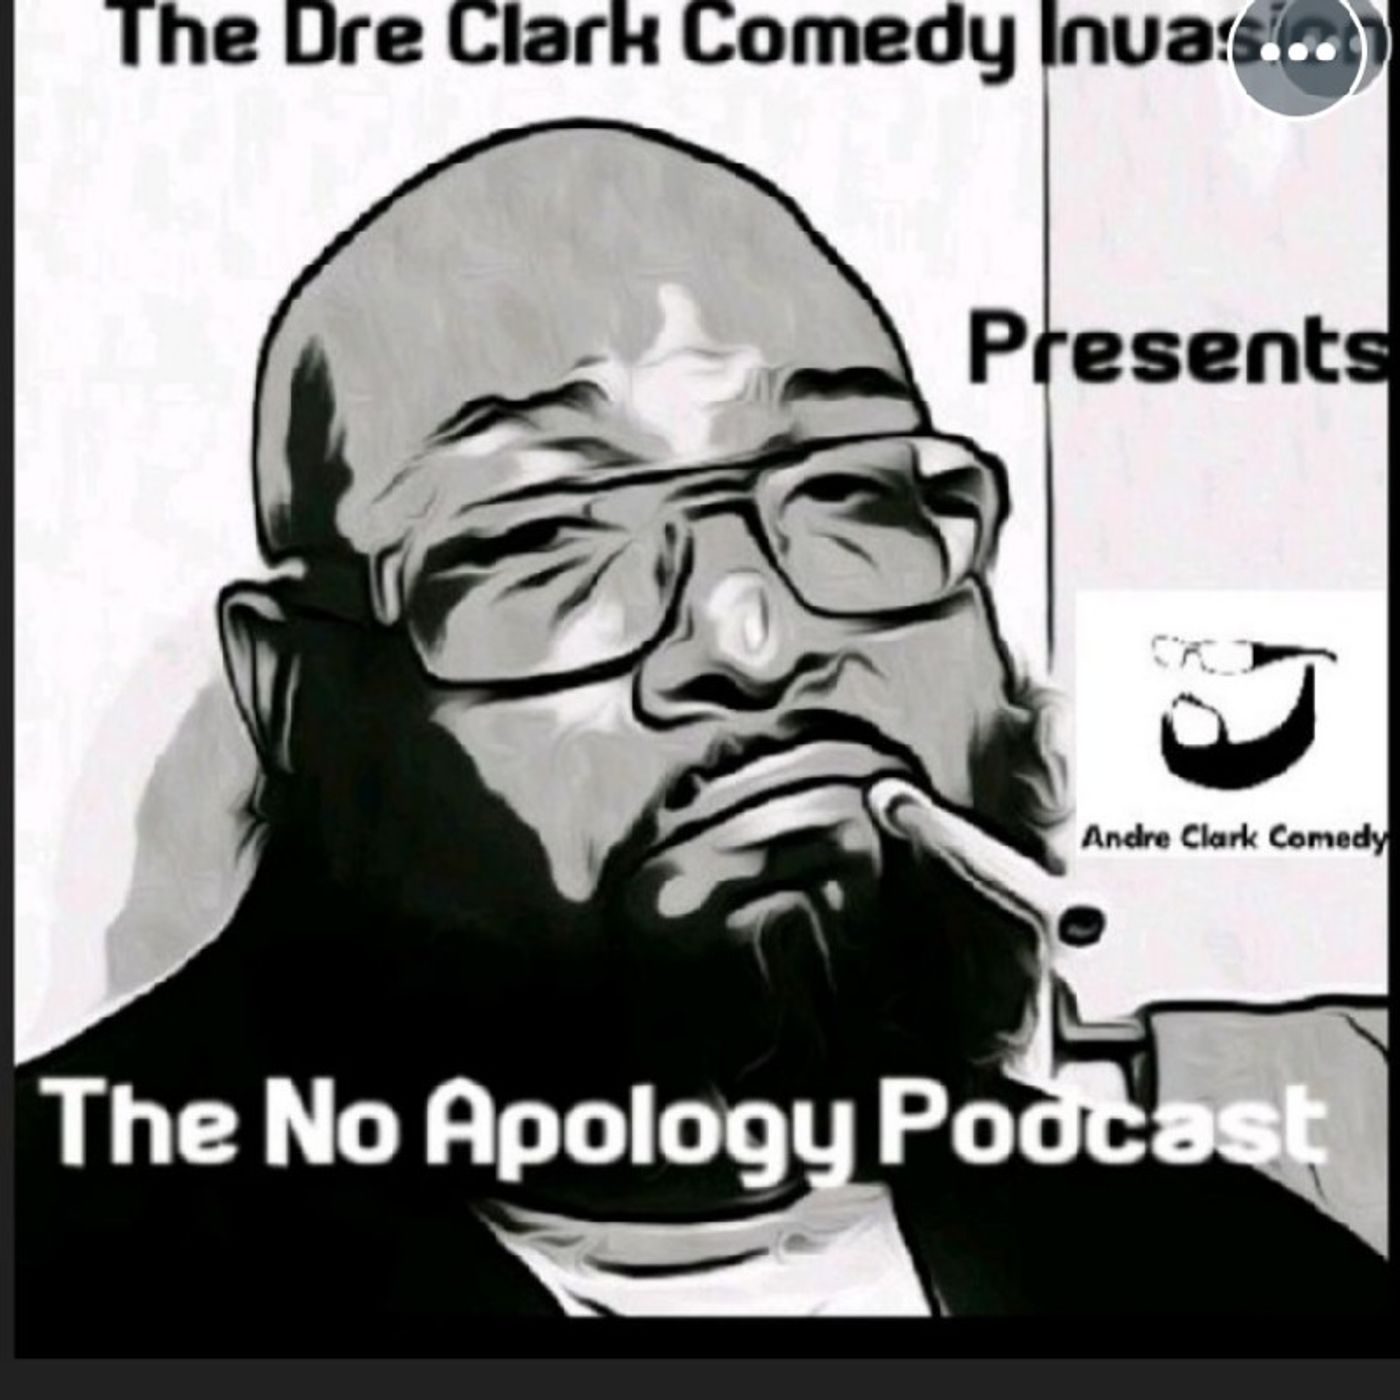 The No Apology Podcast #166 I Don't Know Man